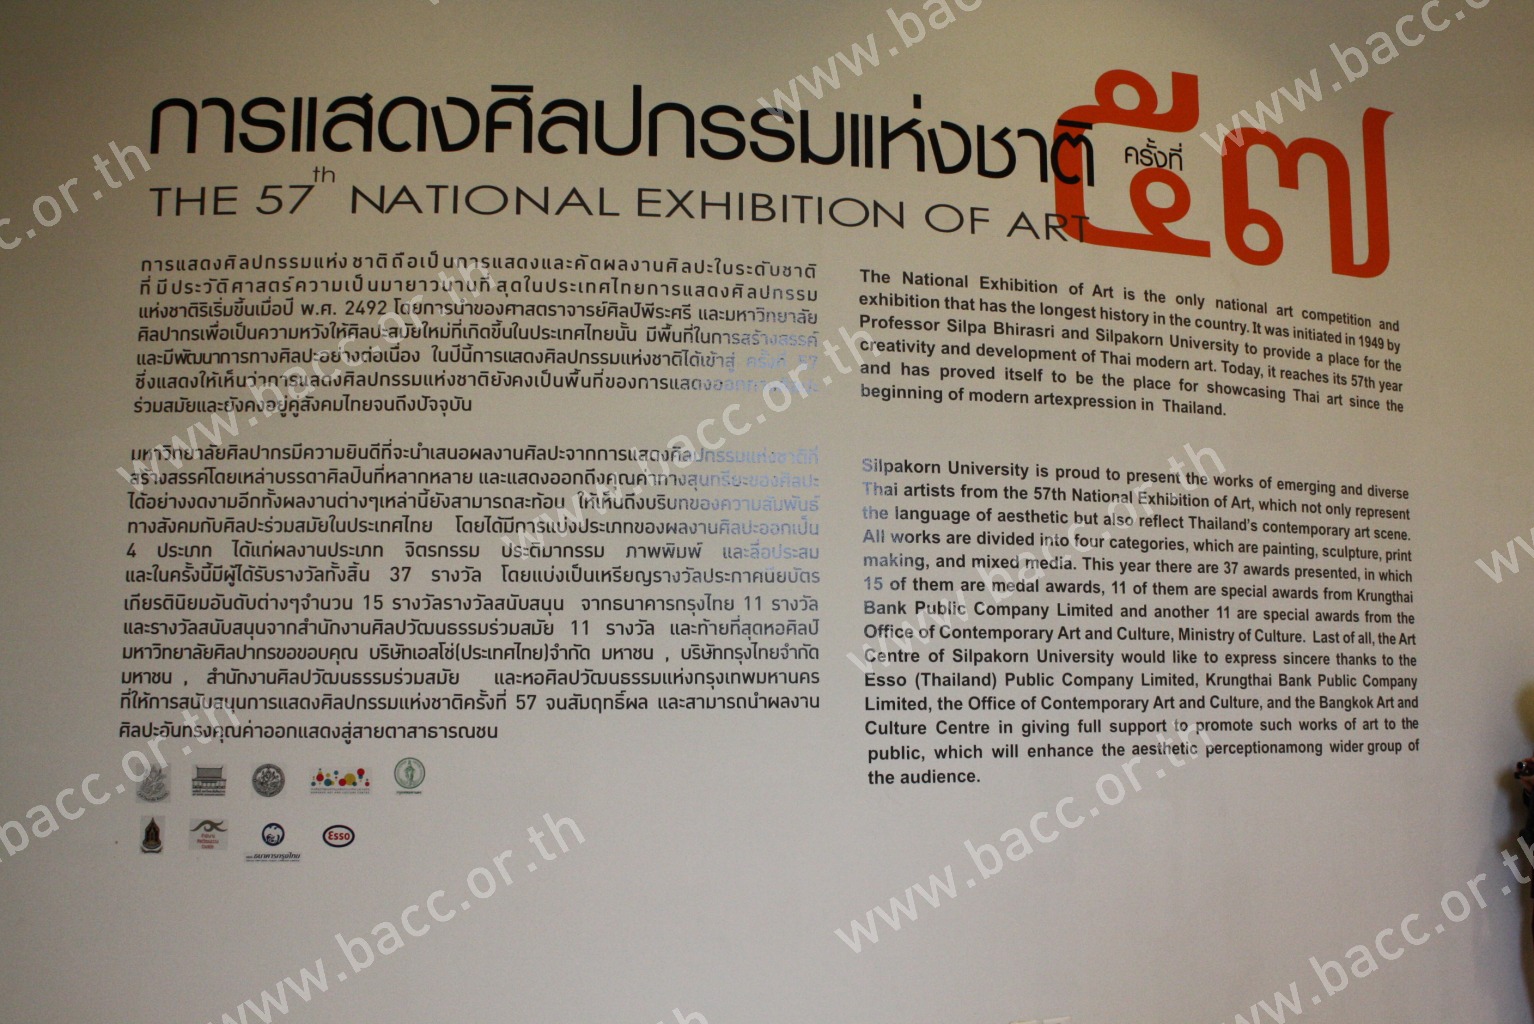 The 57th National Exhibition of Art